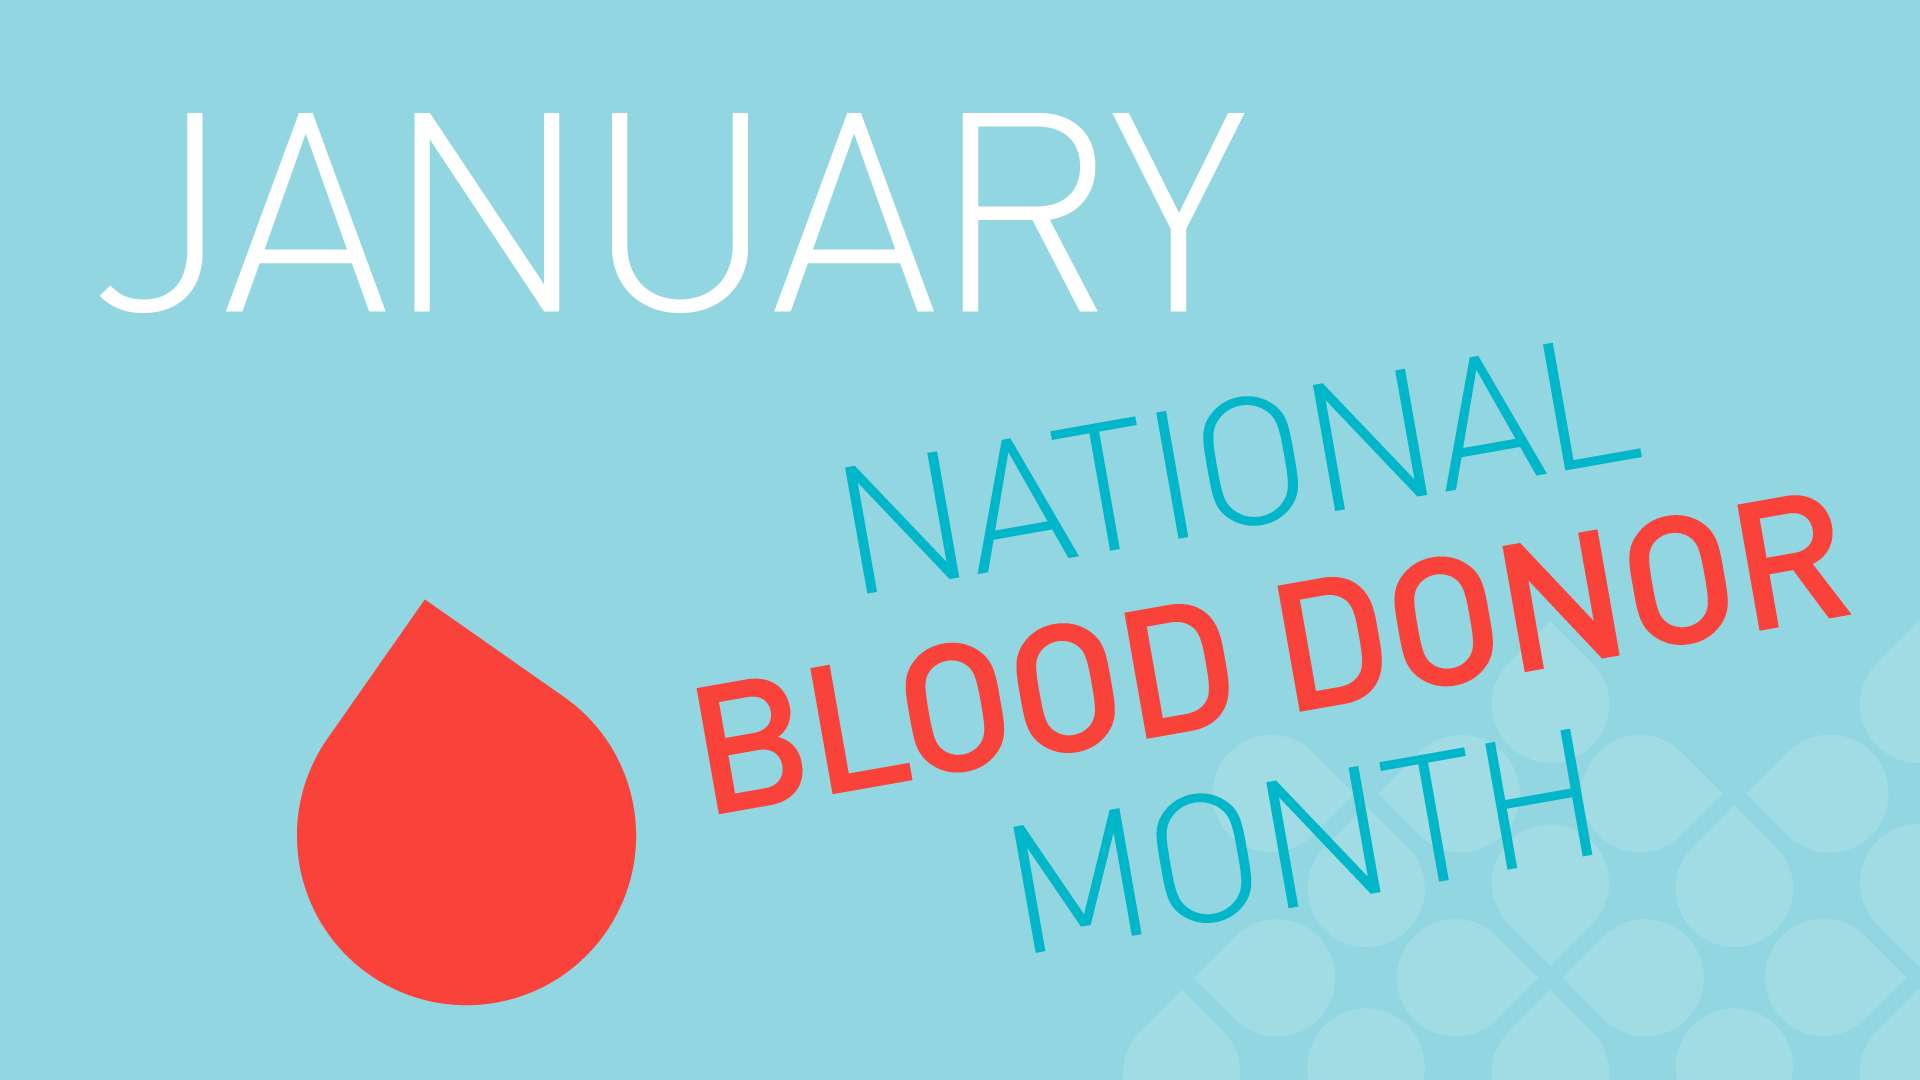 Happy National Blood Donor Month!